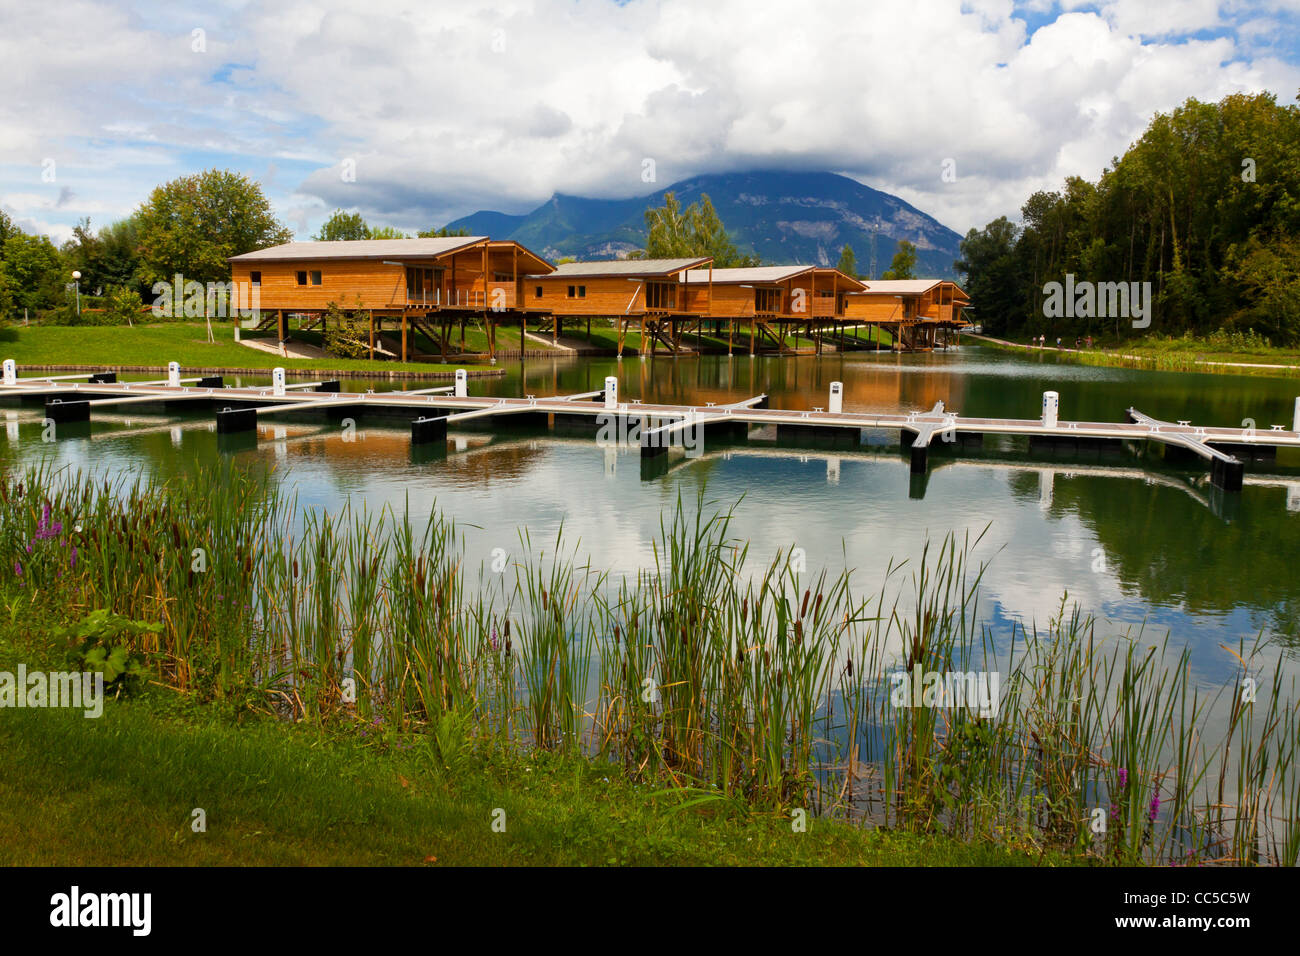 Wooden holiday homes and boat moorings in Chanaz on the banks of the Canal de Savieres in Savoie south eastern France Stock Photo